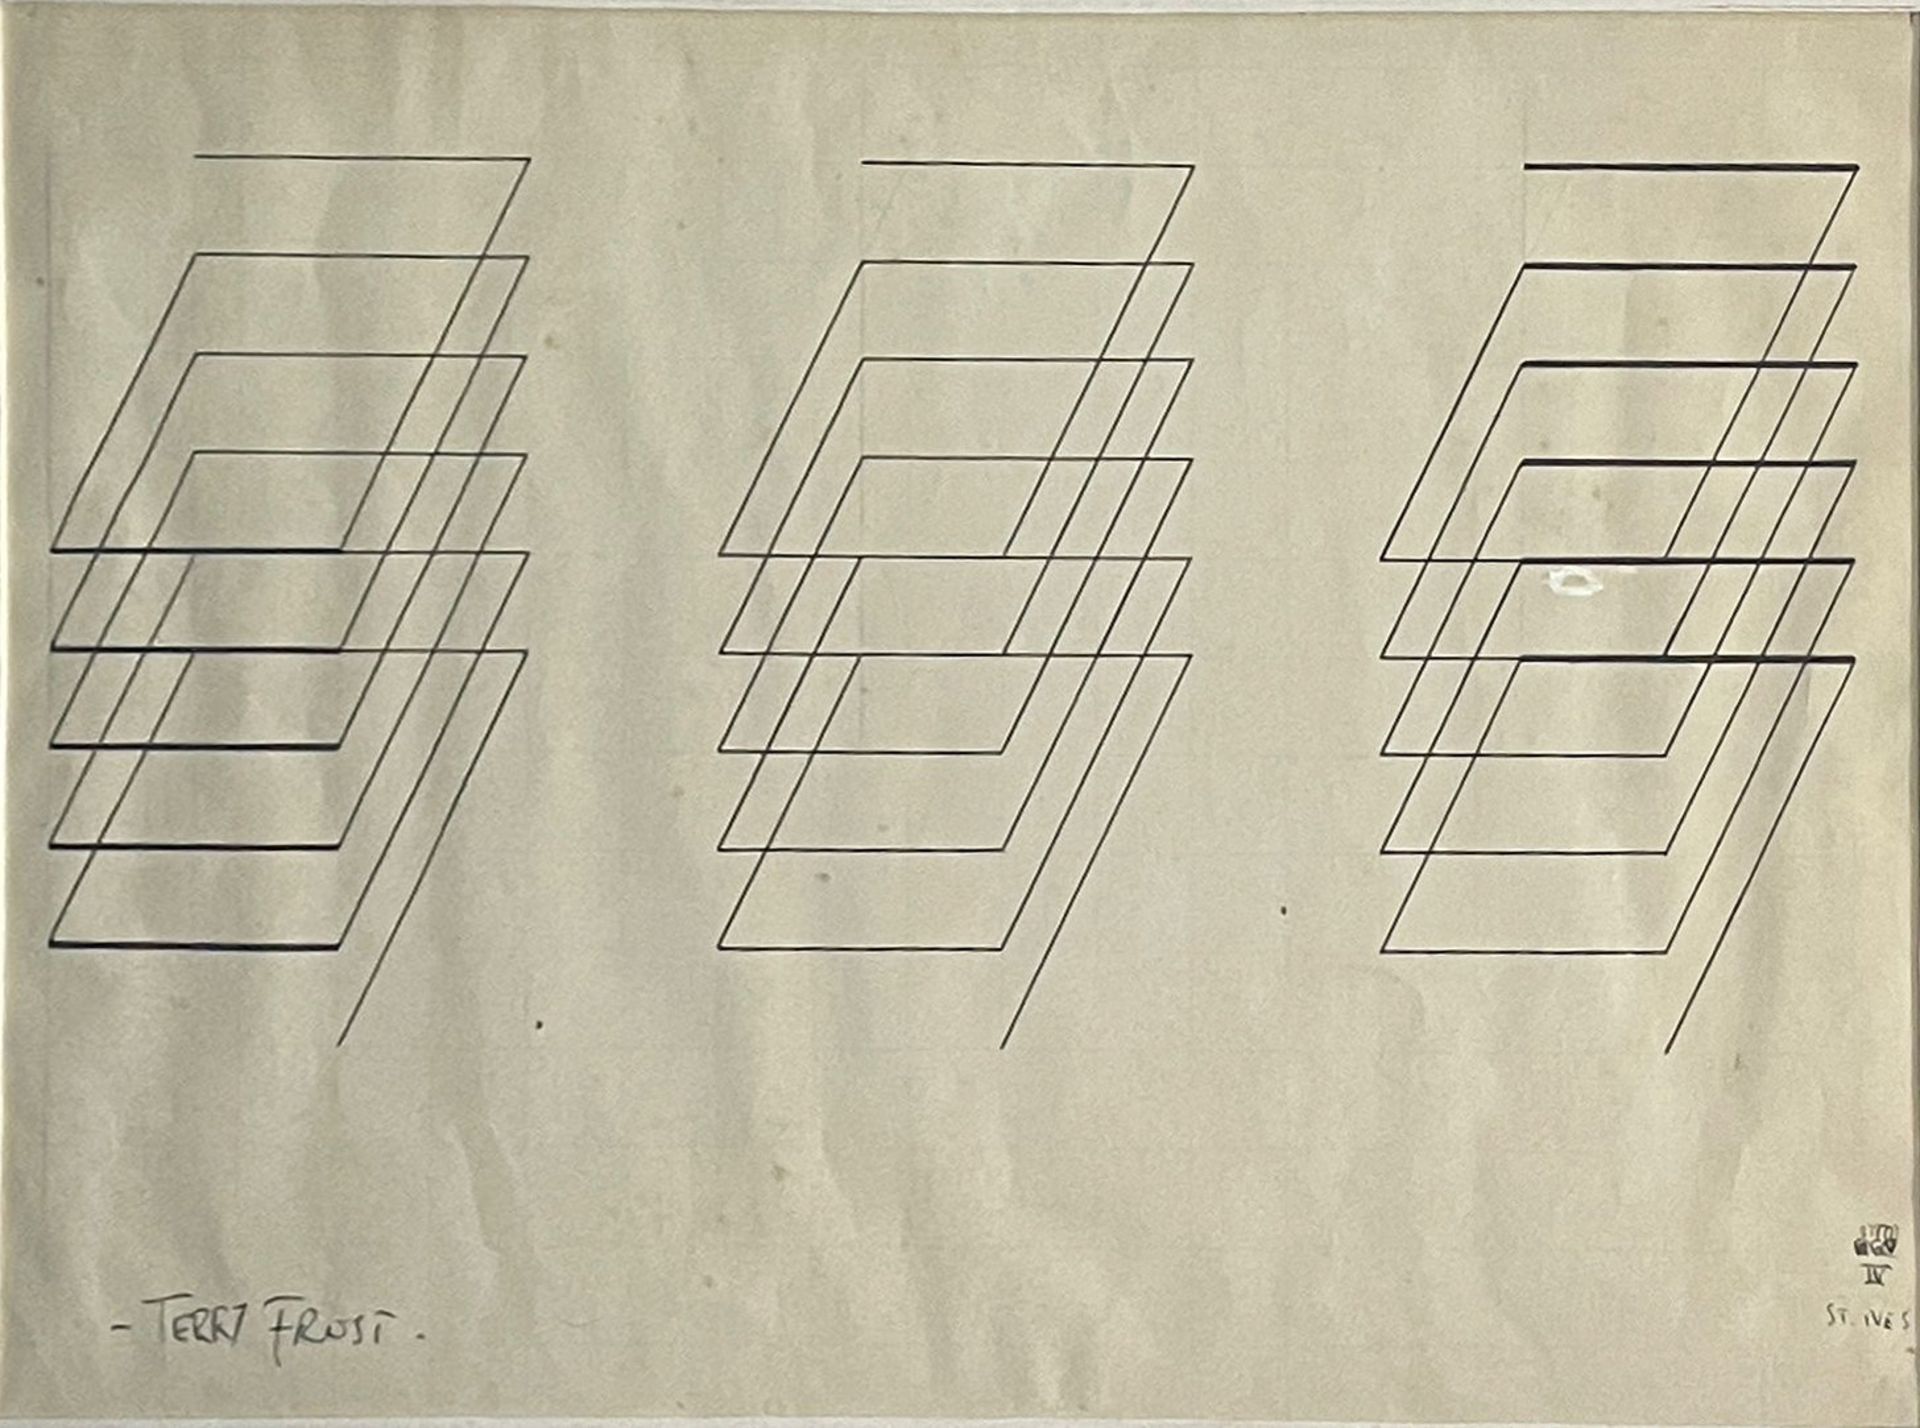 TERRY FROST (1915-2003) - UNTITLED - PEN ON PAPER